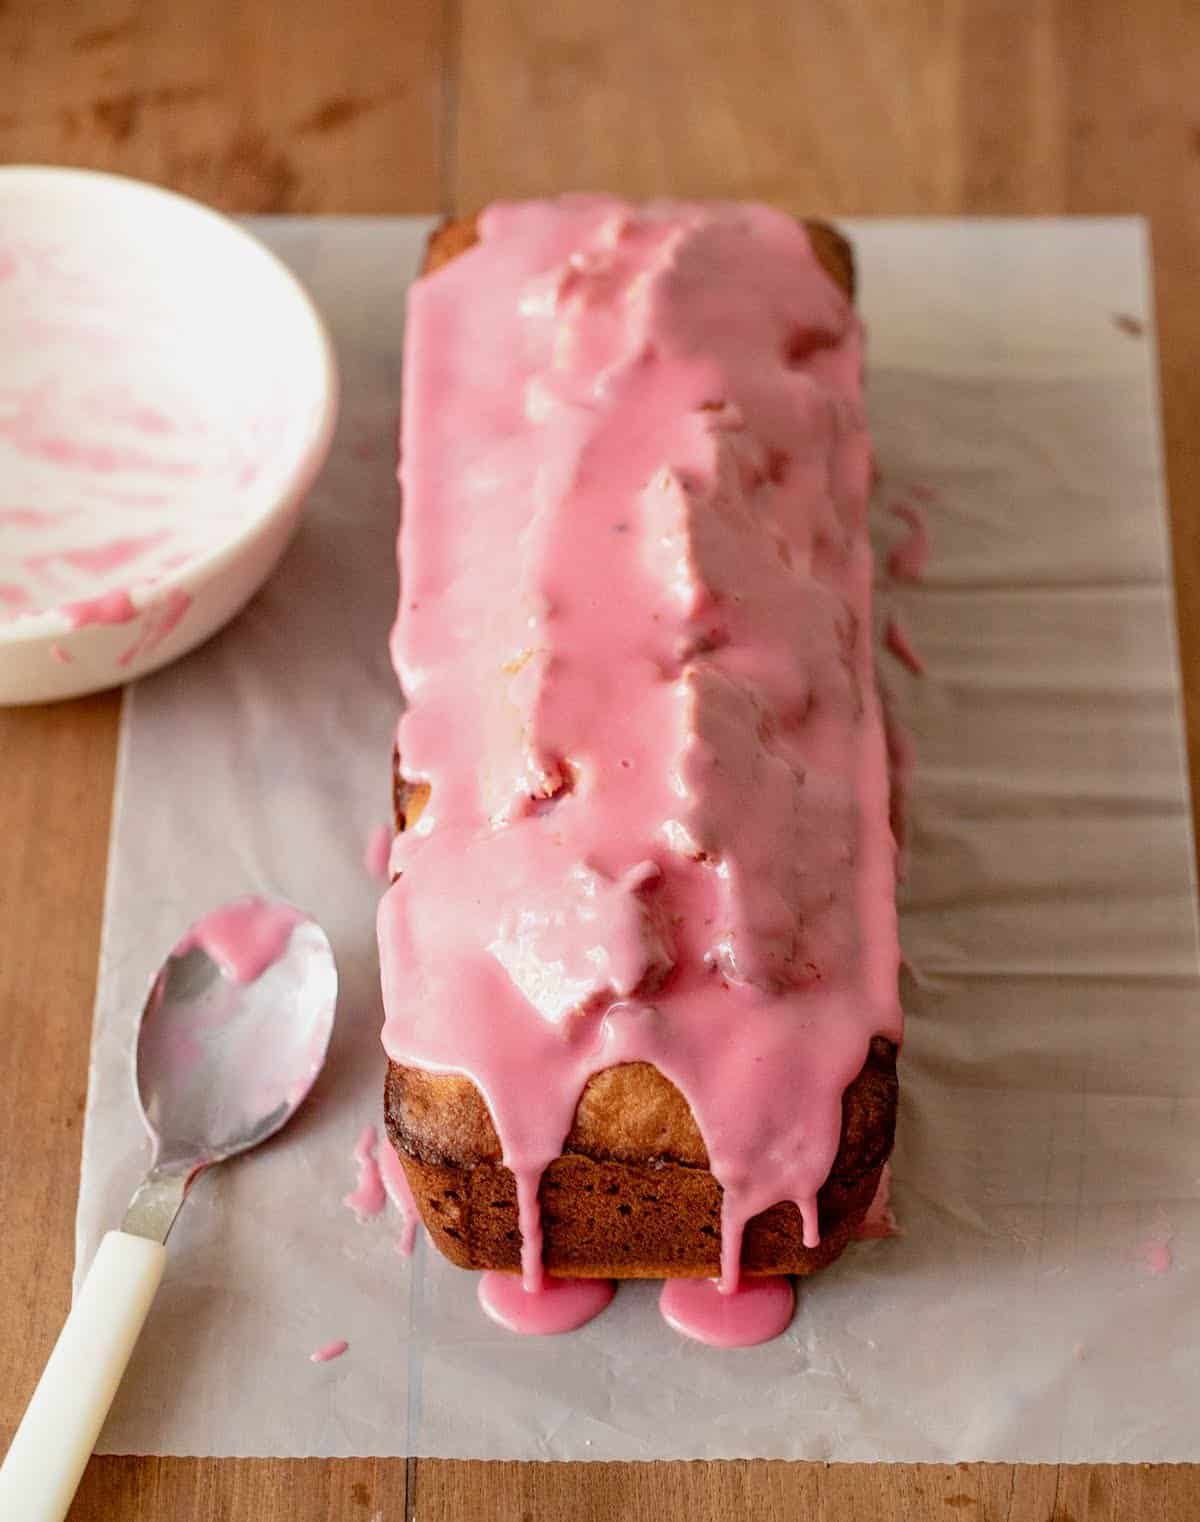 Pink glazed loaf on parchment paper on wooden table, white bowl and spoon.